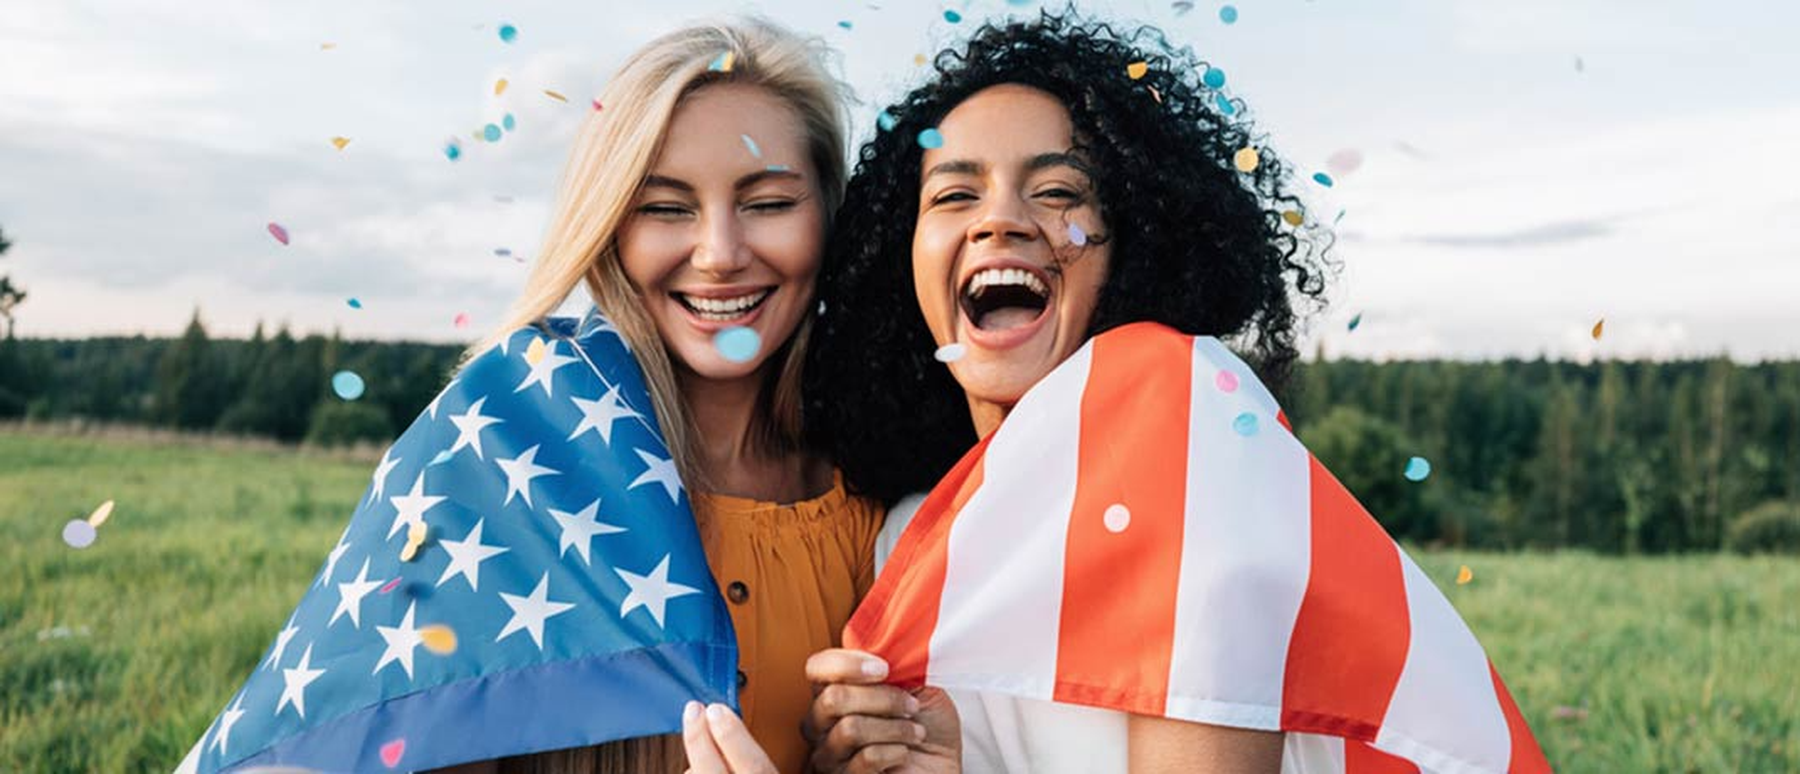 Celebrate Fourth of July with Stars, Stripes and Savings 